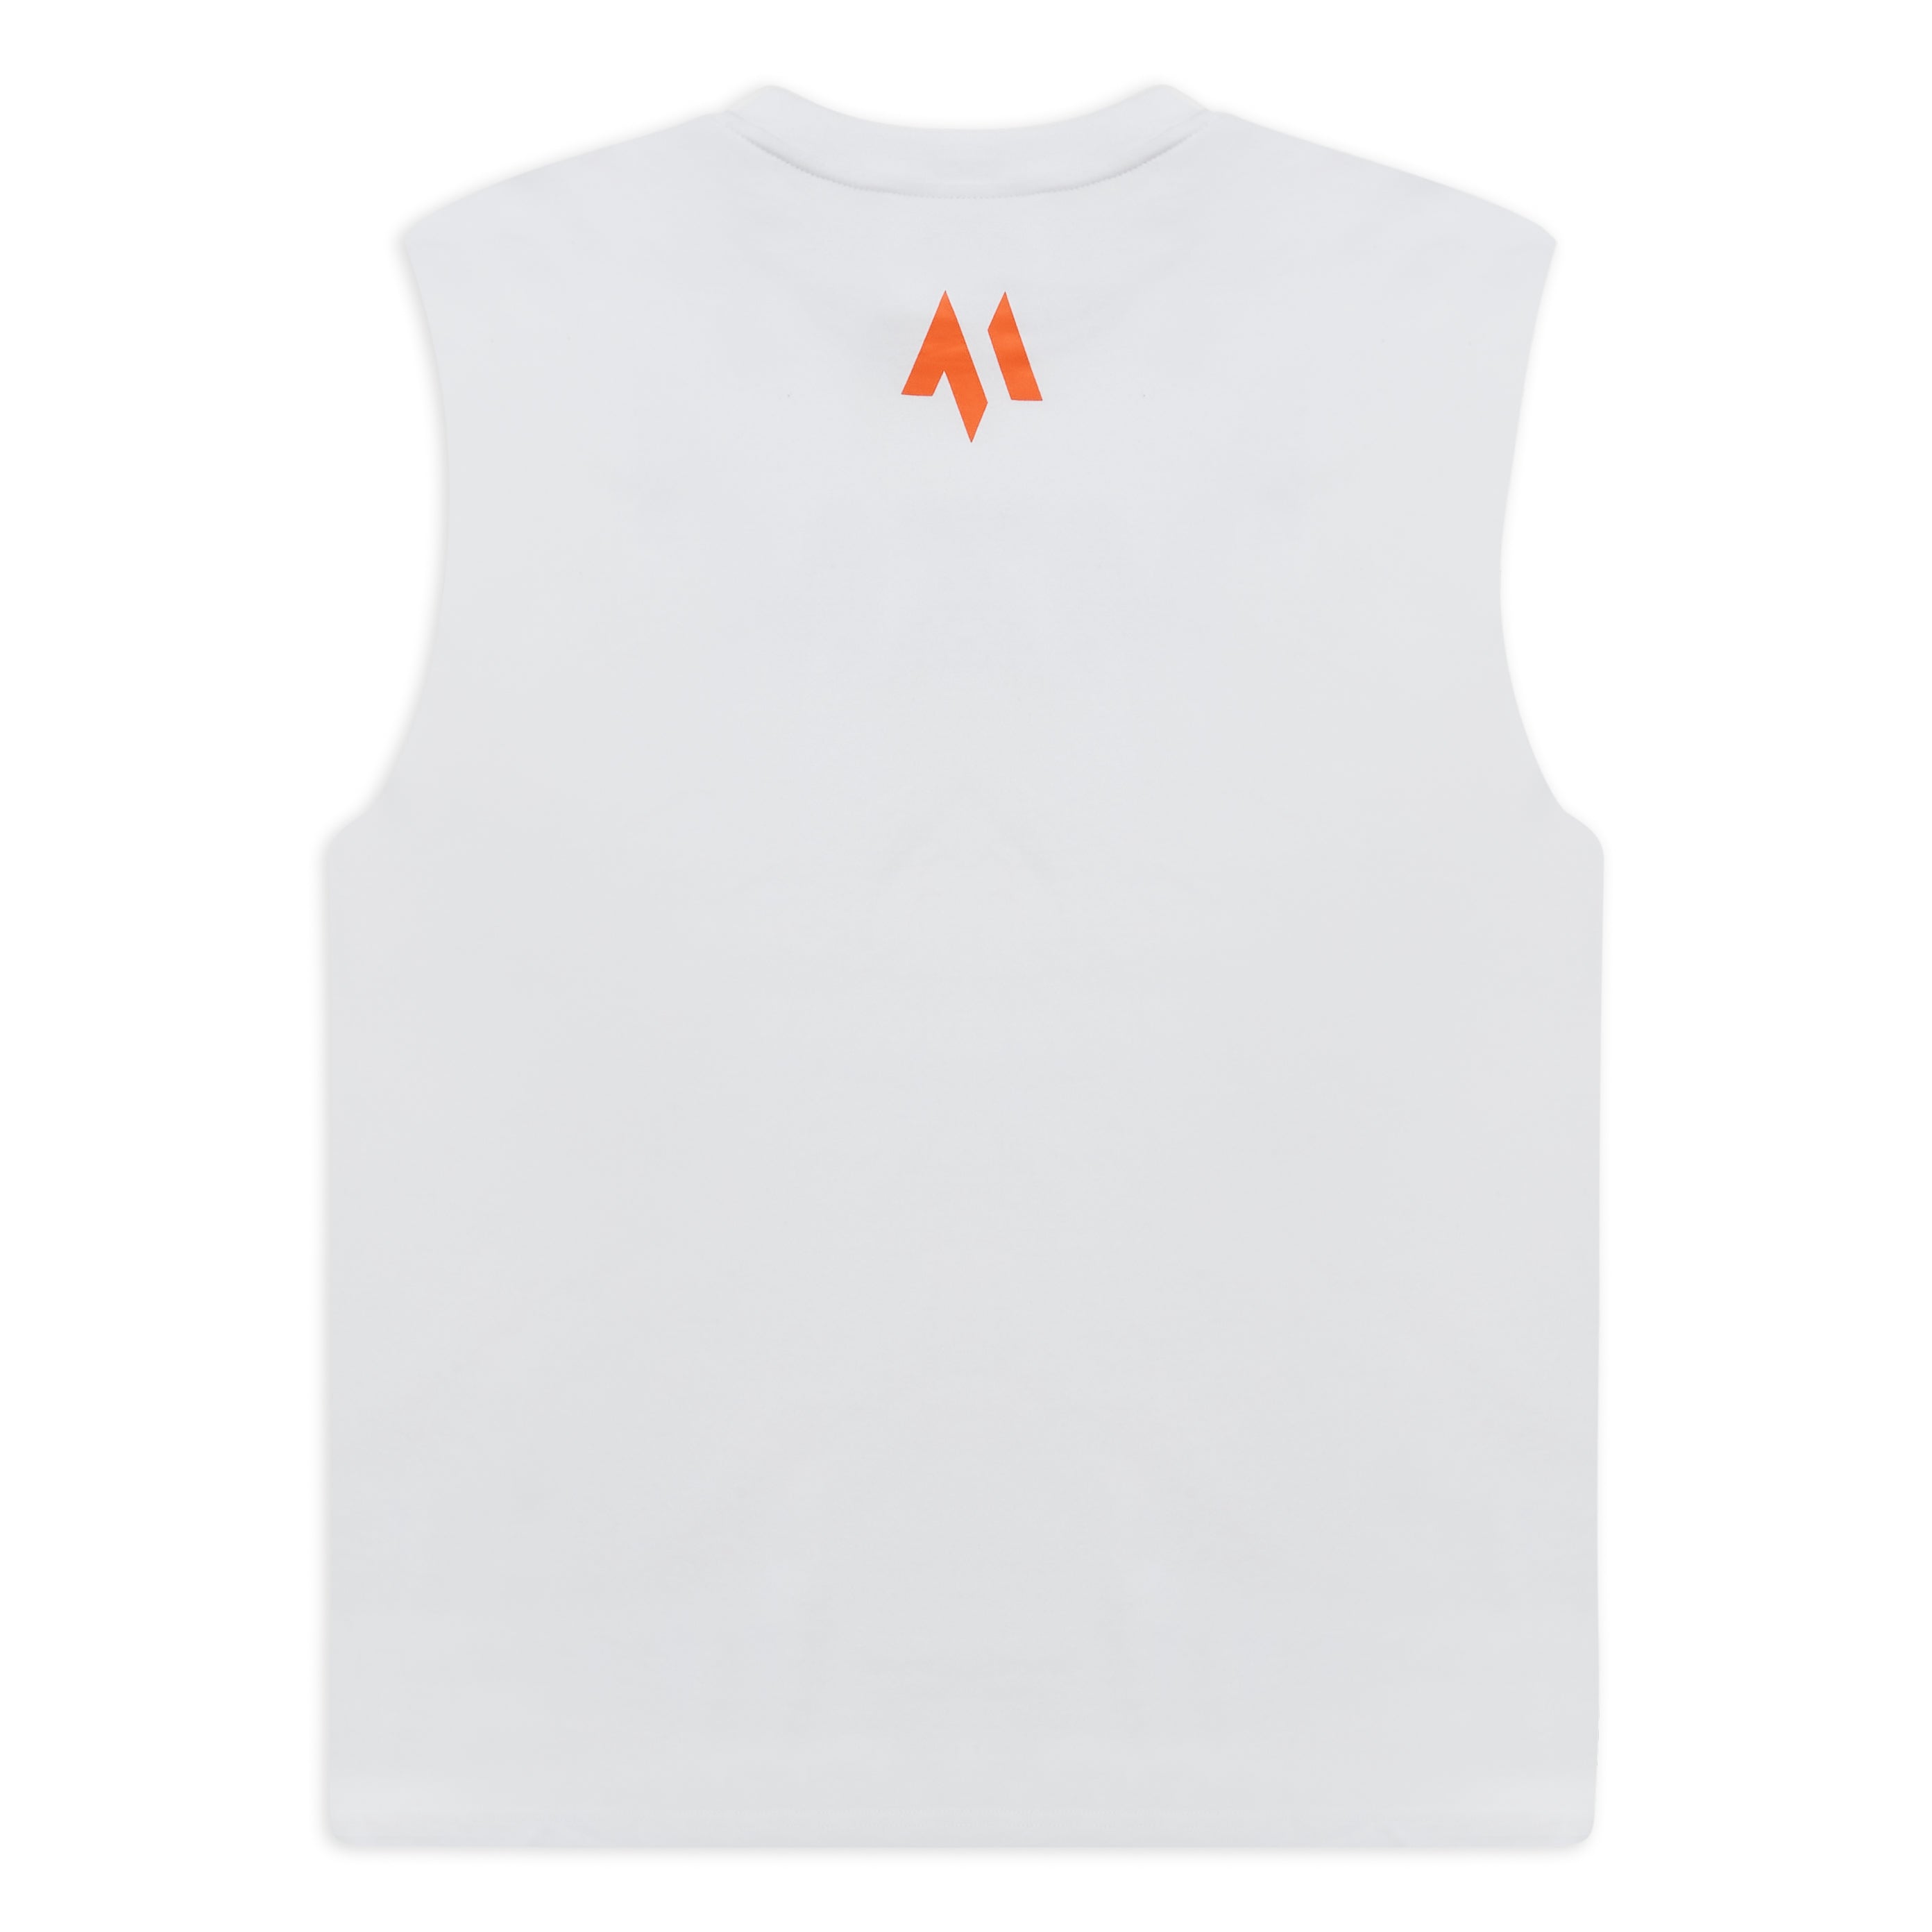 This is a large rear product shot of the new standard vest in white.  It shows the M emblem in signature orange below the neck.